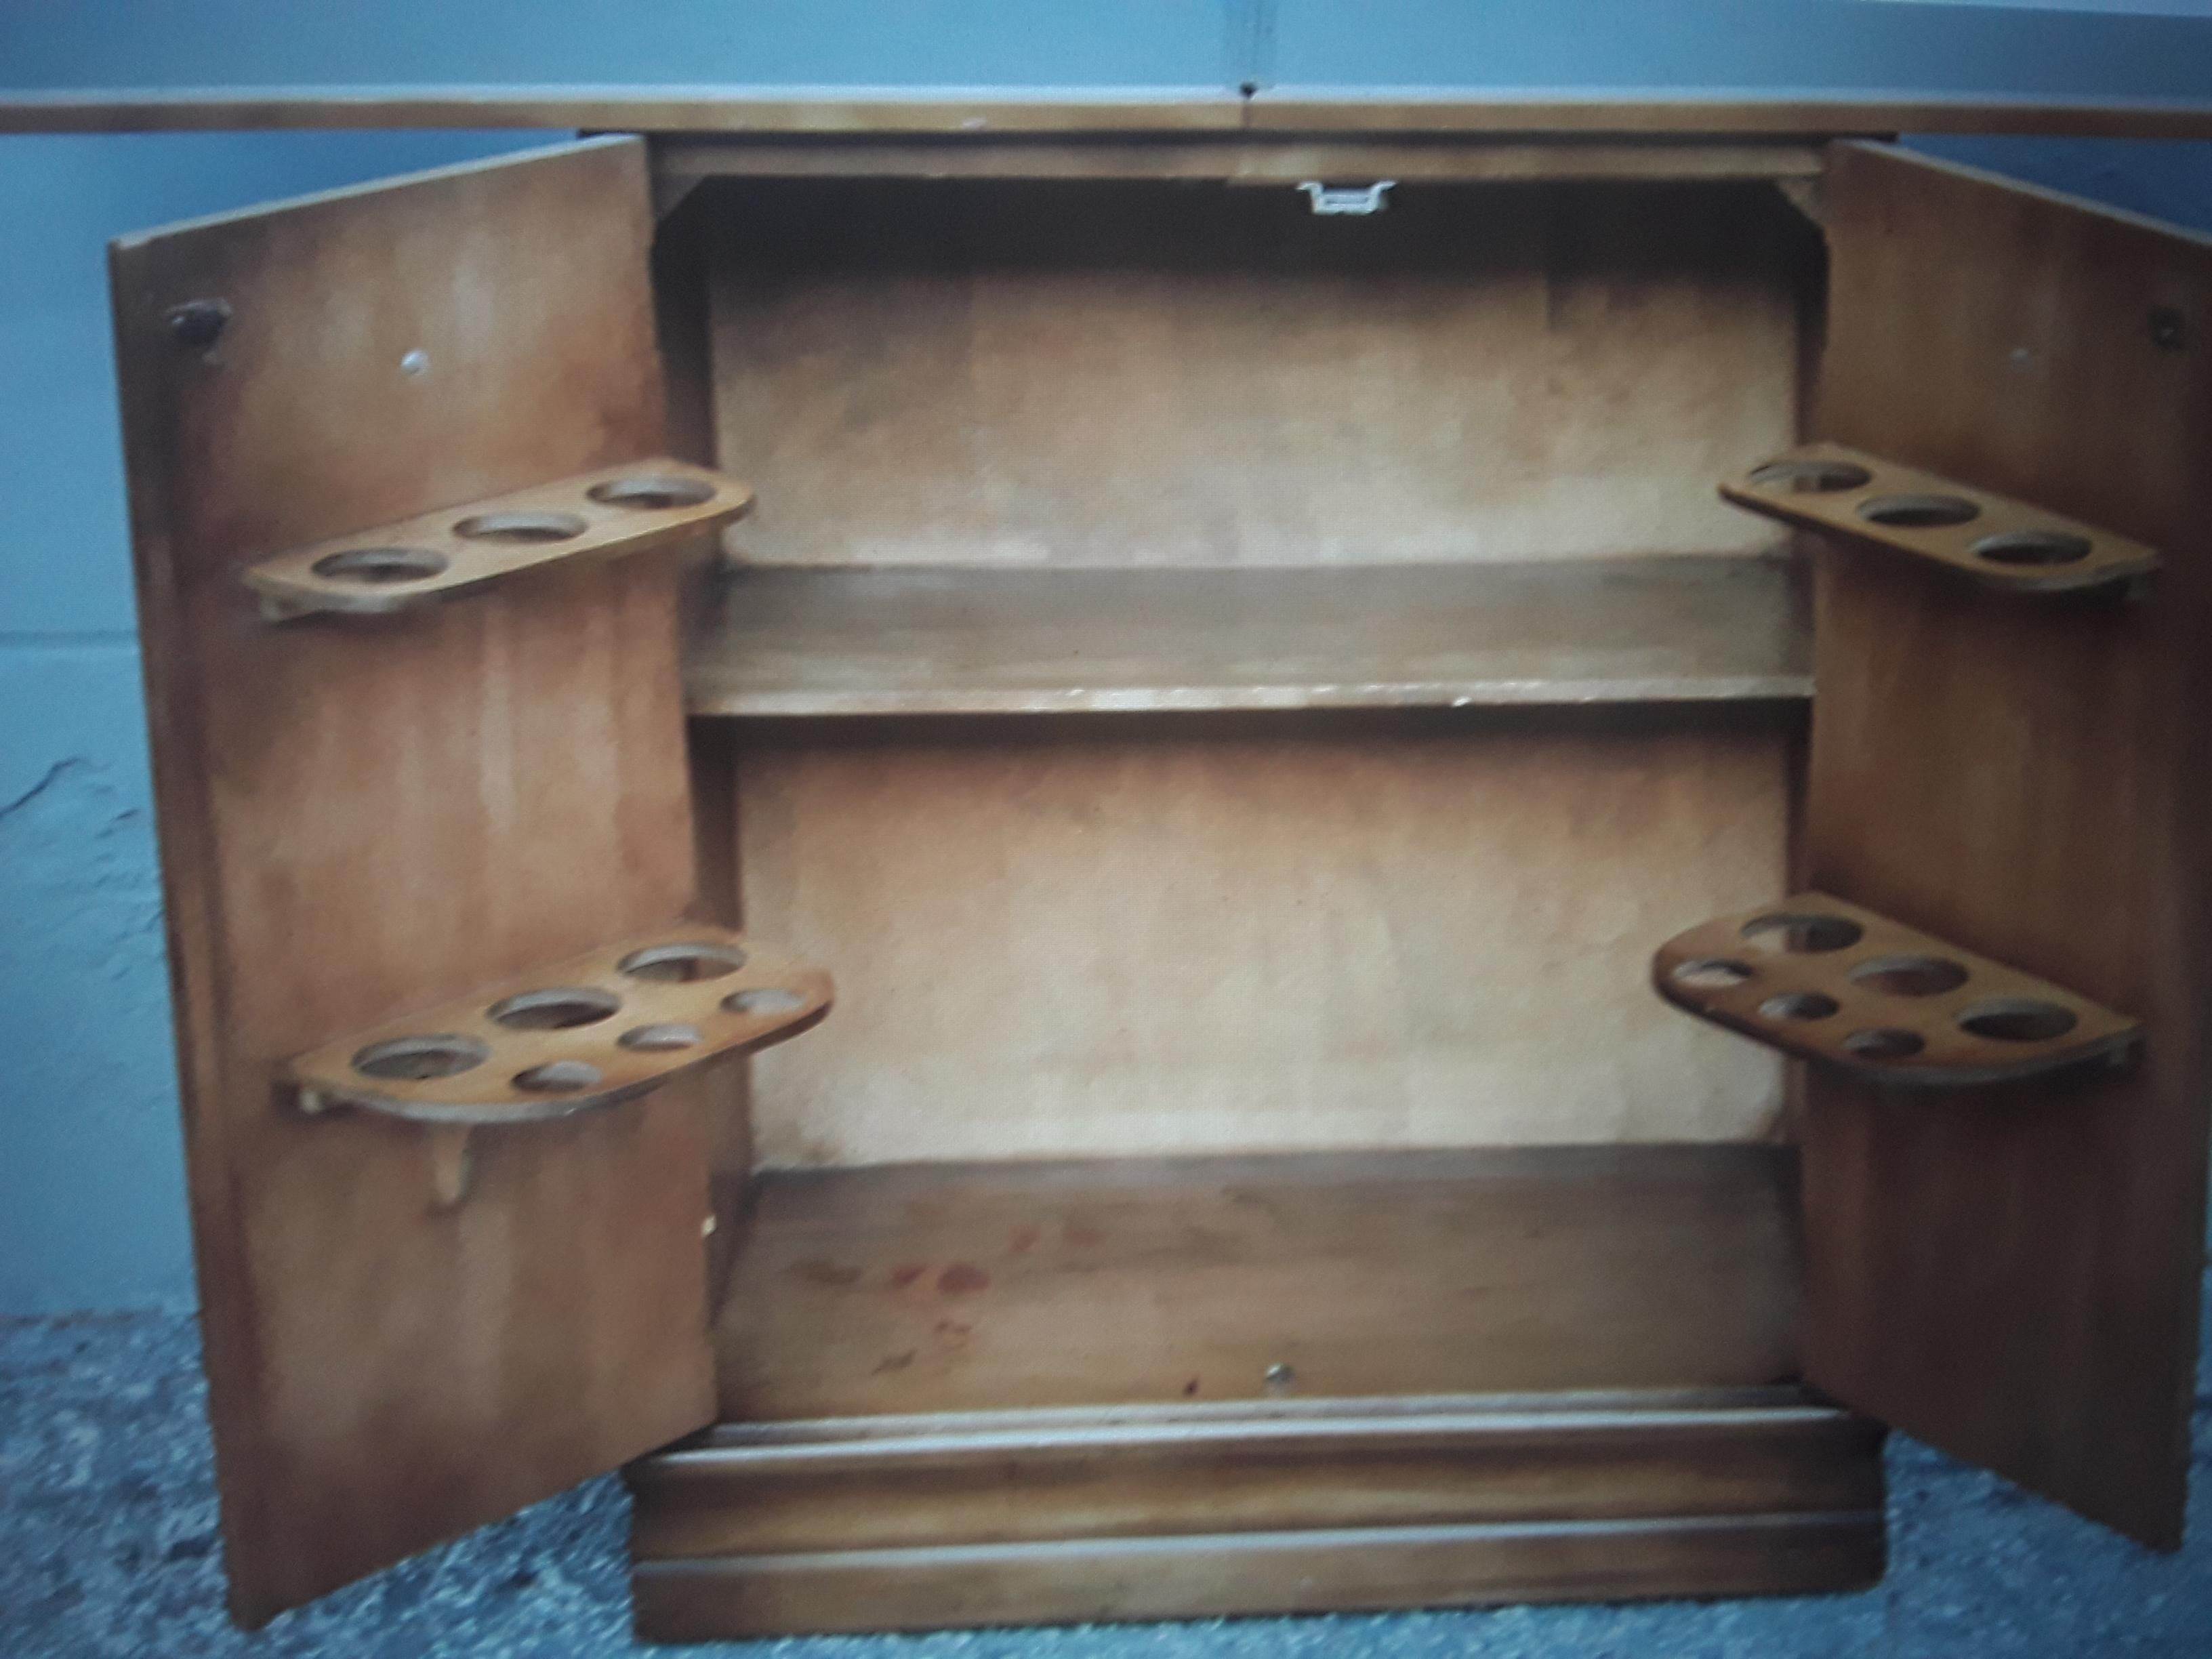 1950's Mid Century Modern Fully Compartmentalized Dry Bar For Sale 1